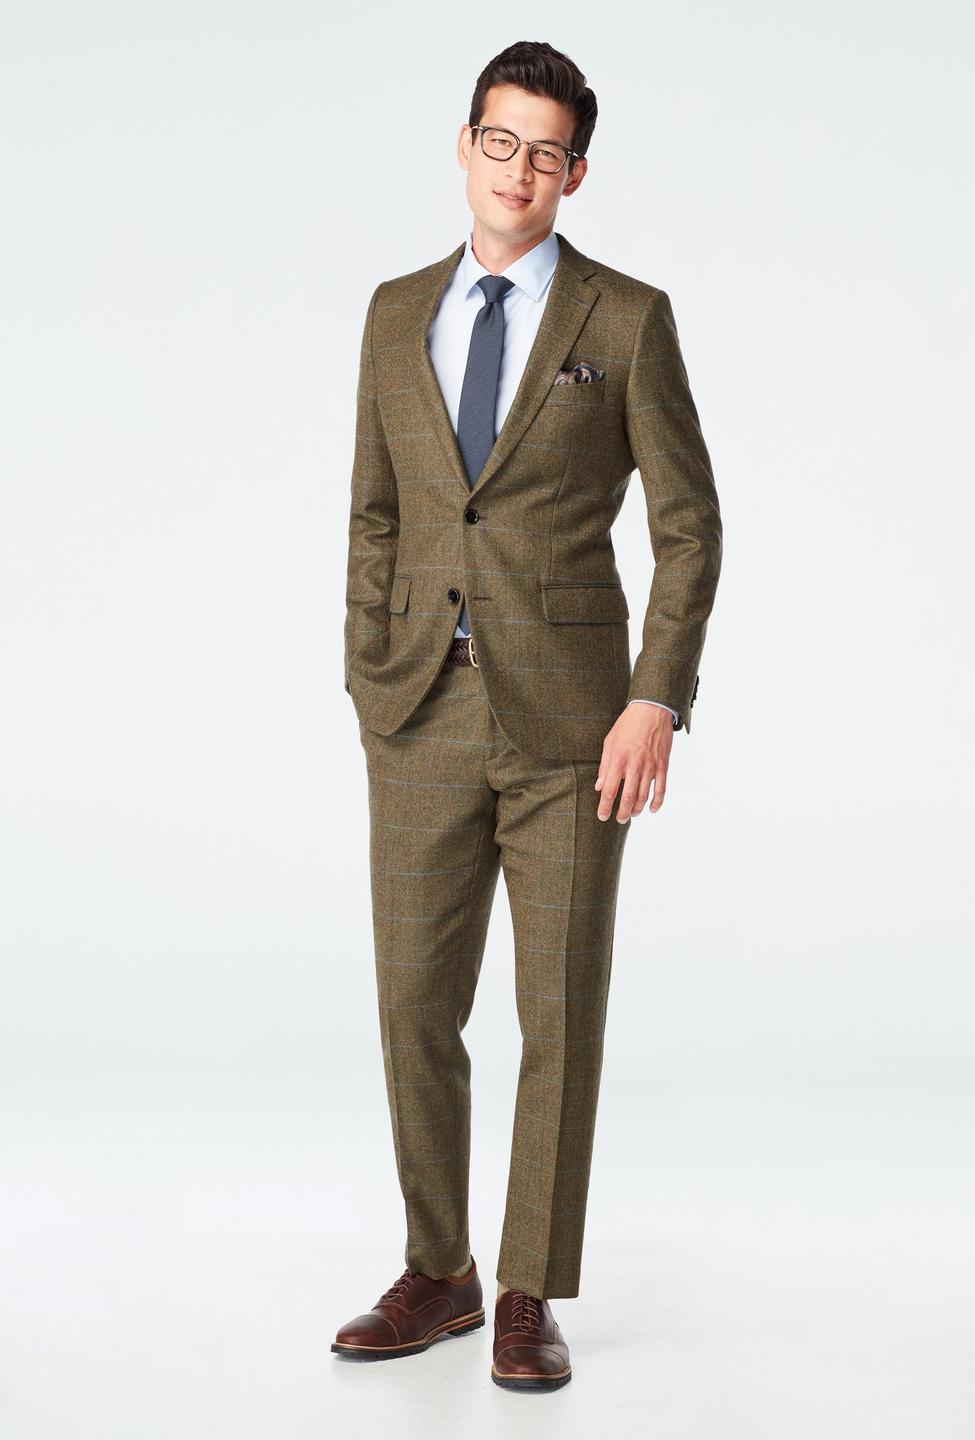 Green suit - Darfield Plaid Design from Seasonal Indochino Collection